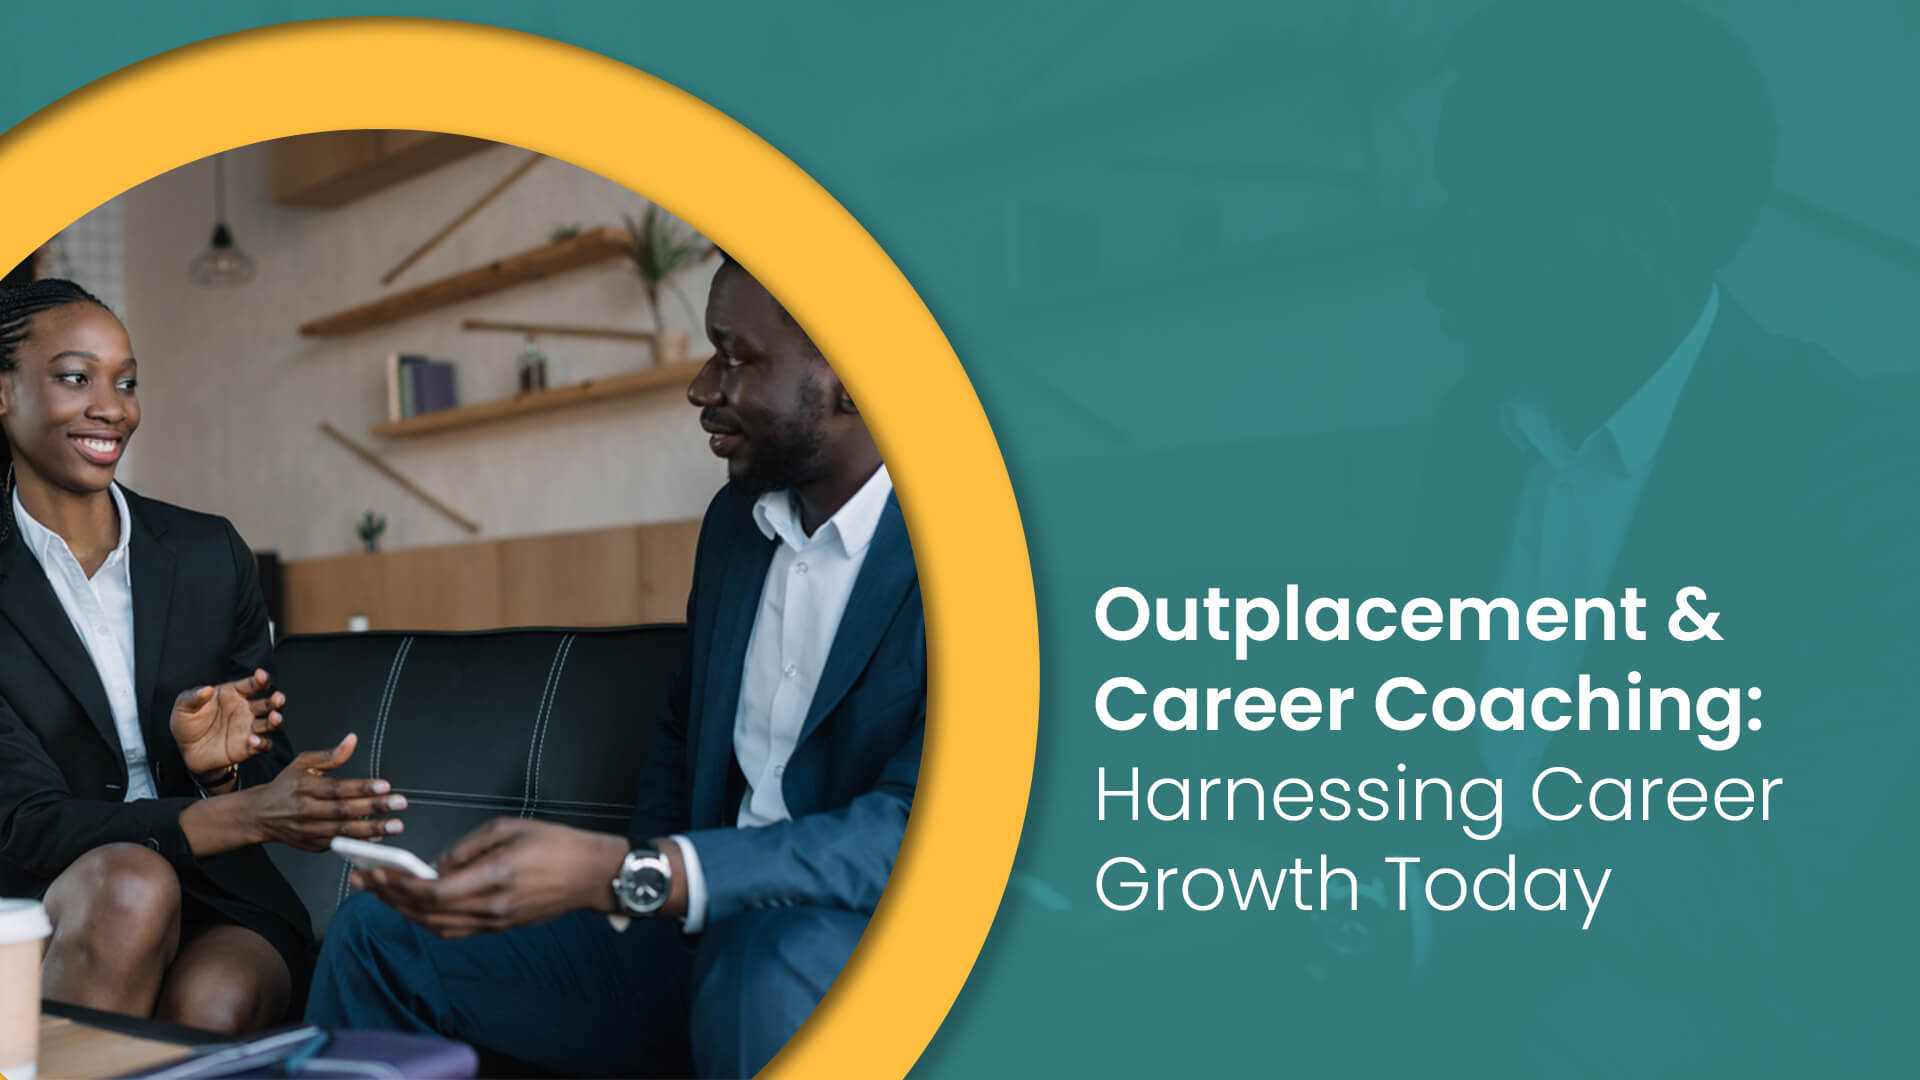 Discussion on harnessing career growth today